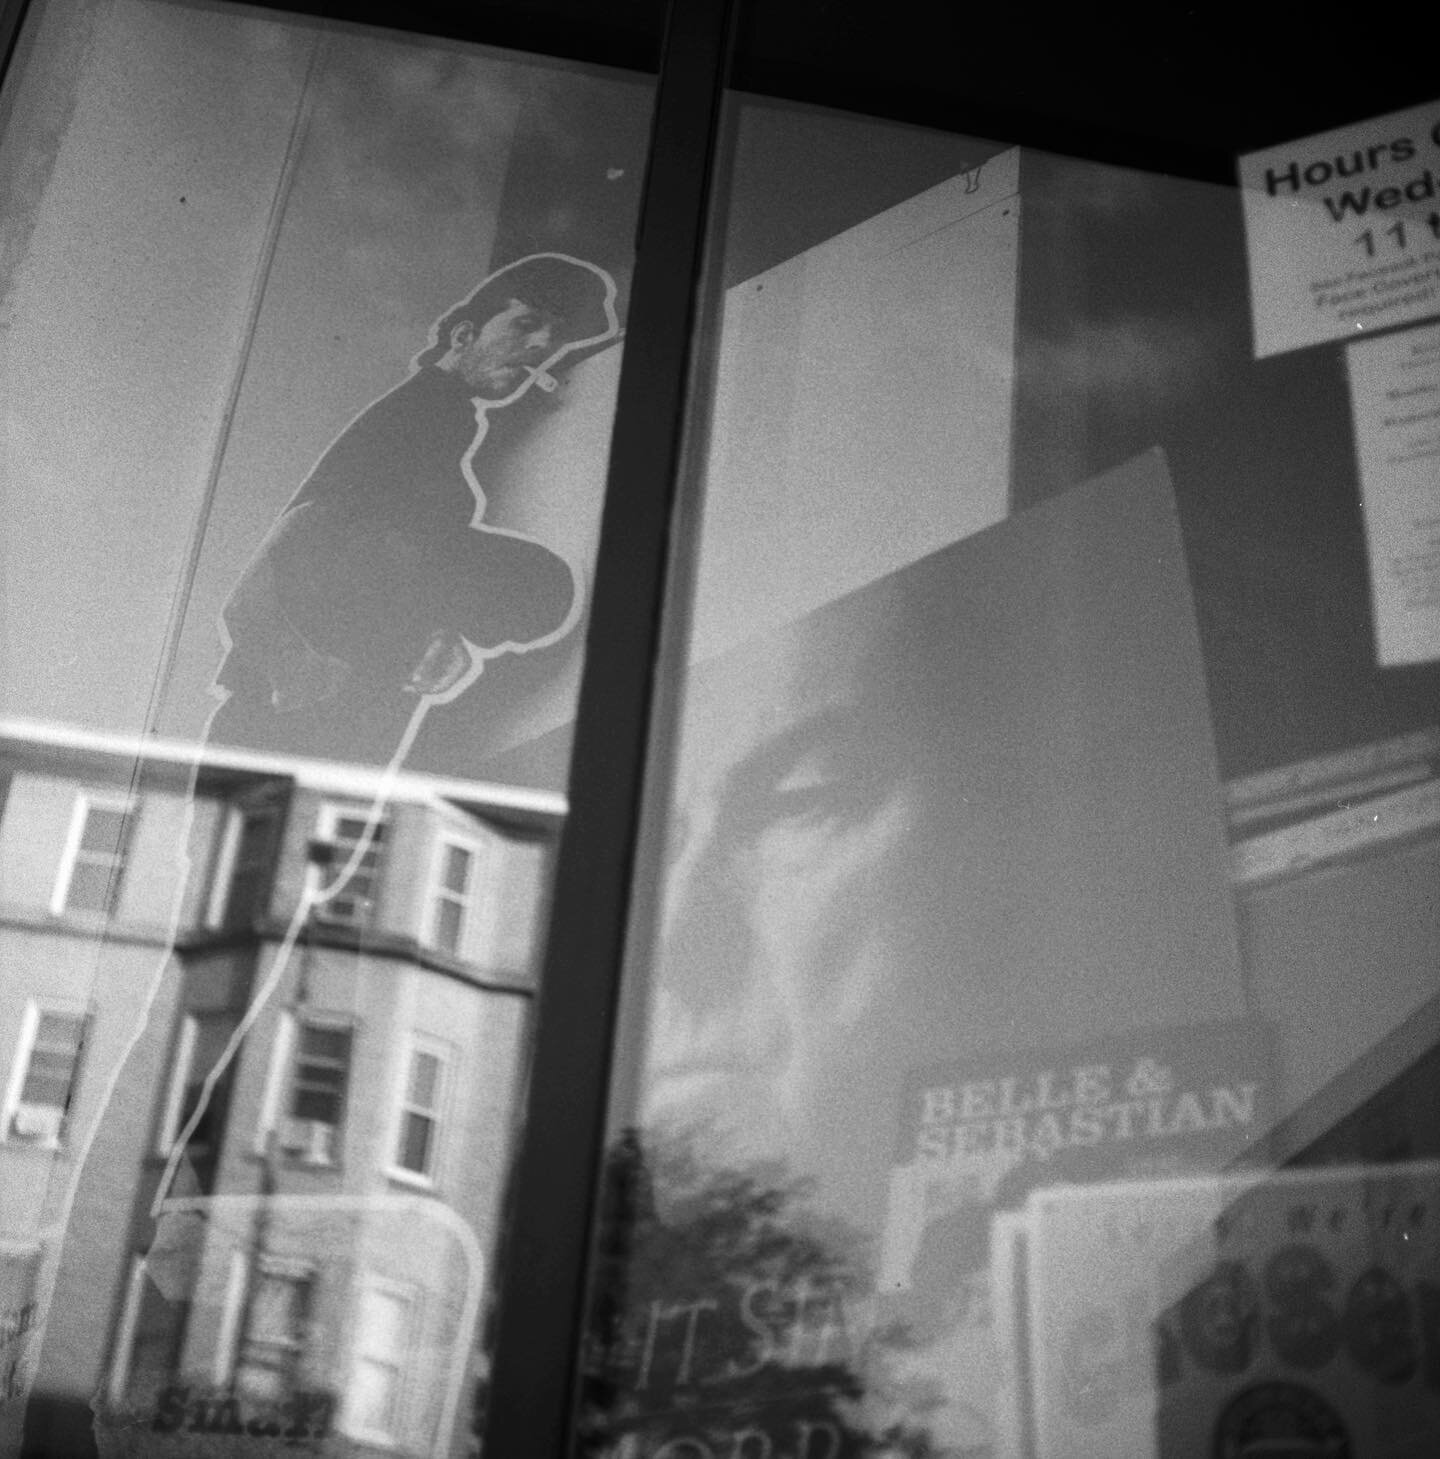 Oh hi, Tom. The Record Exchange. Salem, MA. Shot on Ilford HP5+ 400 ISO film. Rolleiflex 120mm.